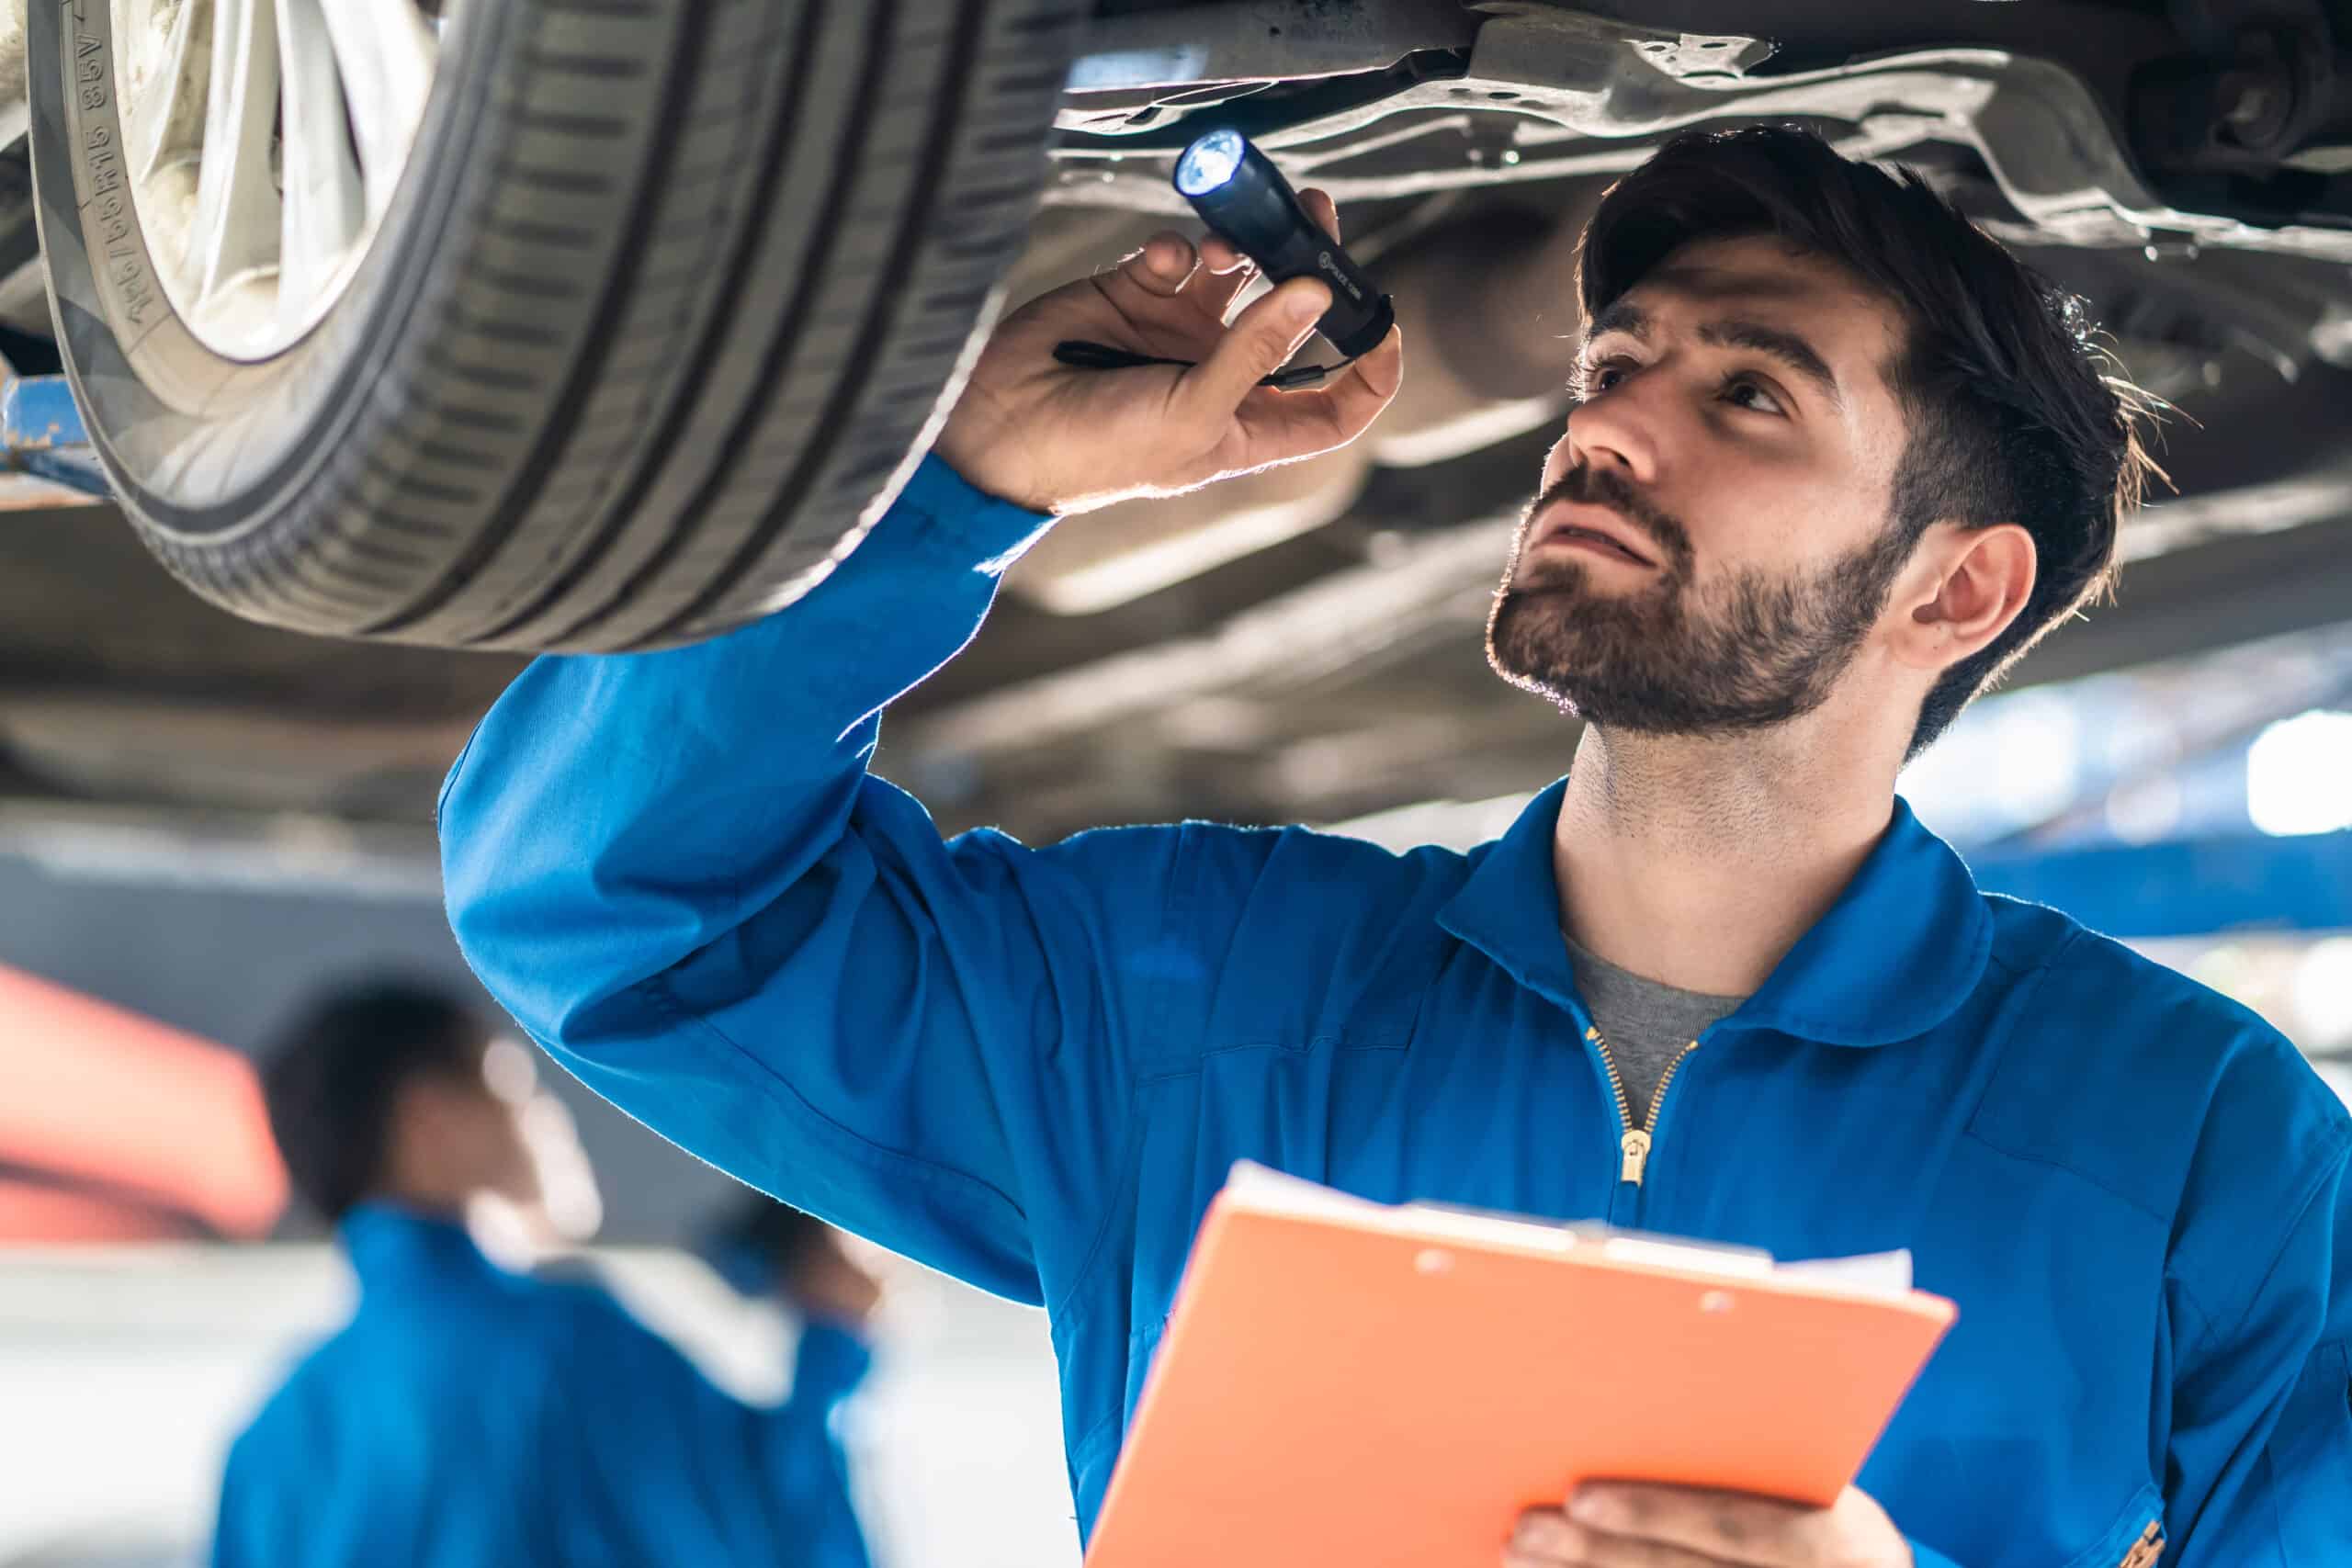 A mechanic performing car brake repair and maintenance during vehicle service, inspecting and maintaining the braking system for optimal safety and performance.